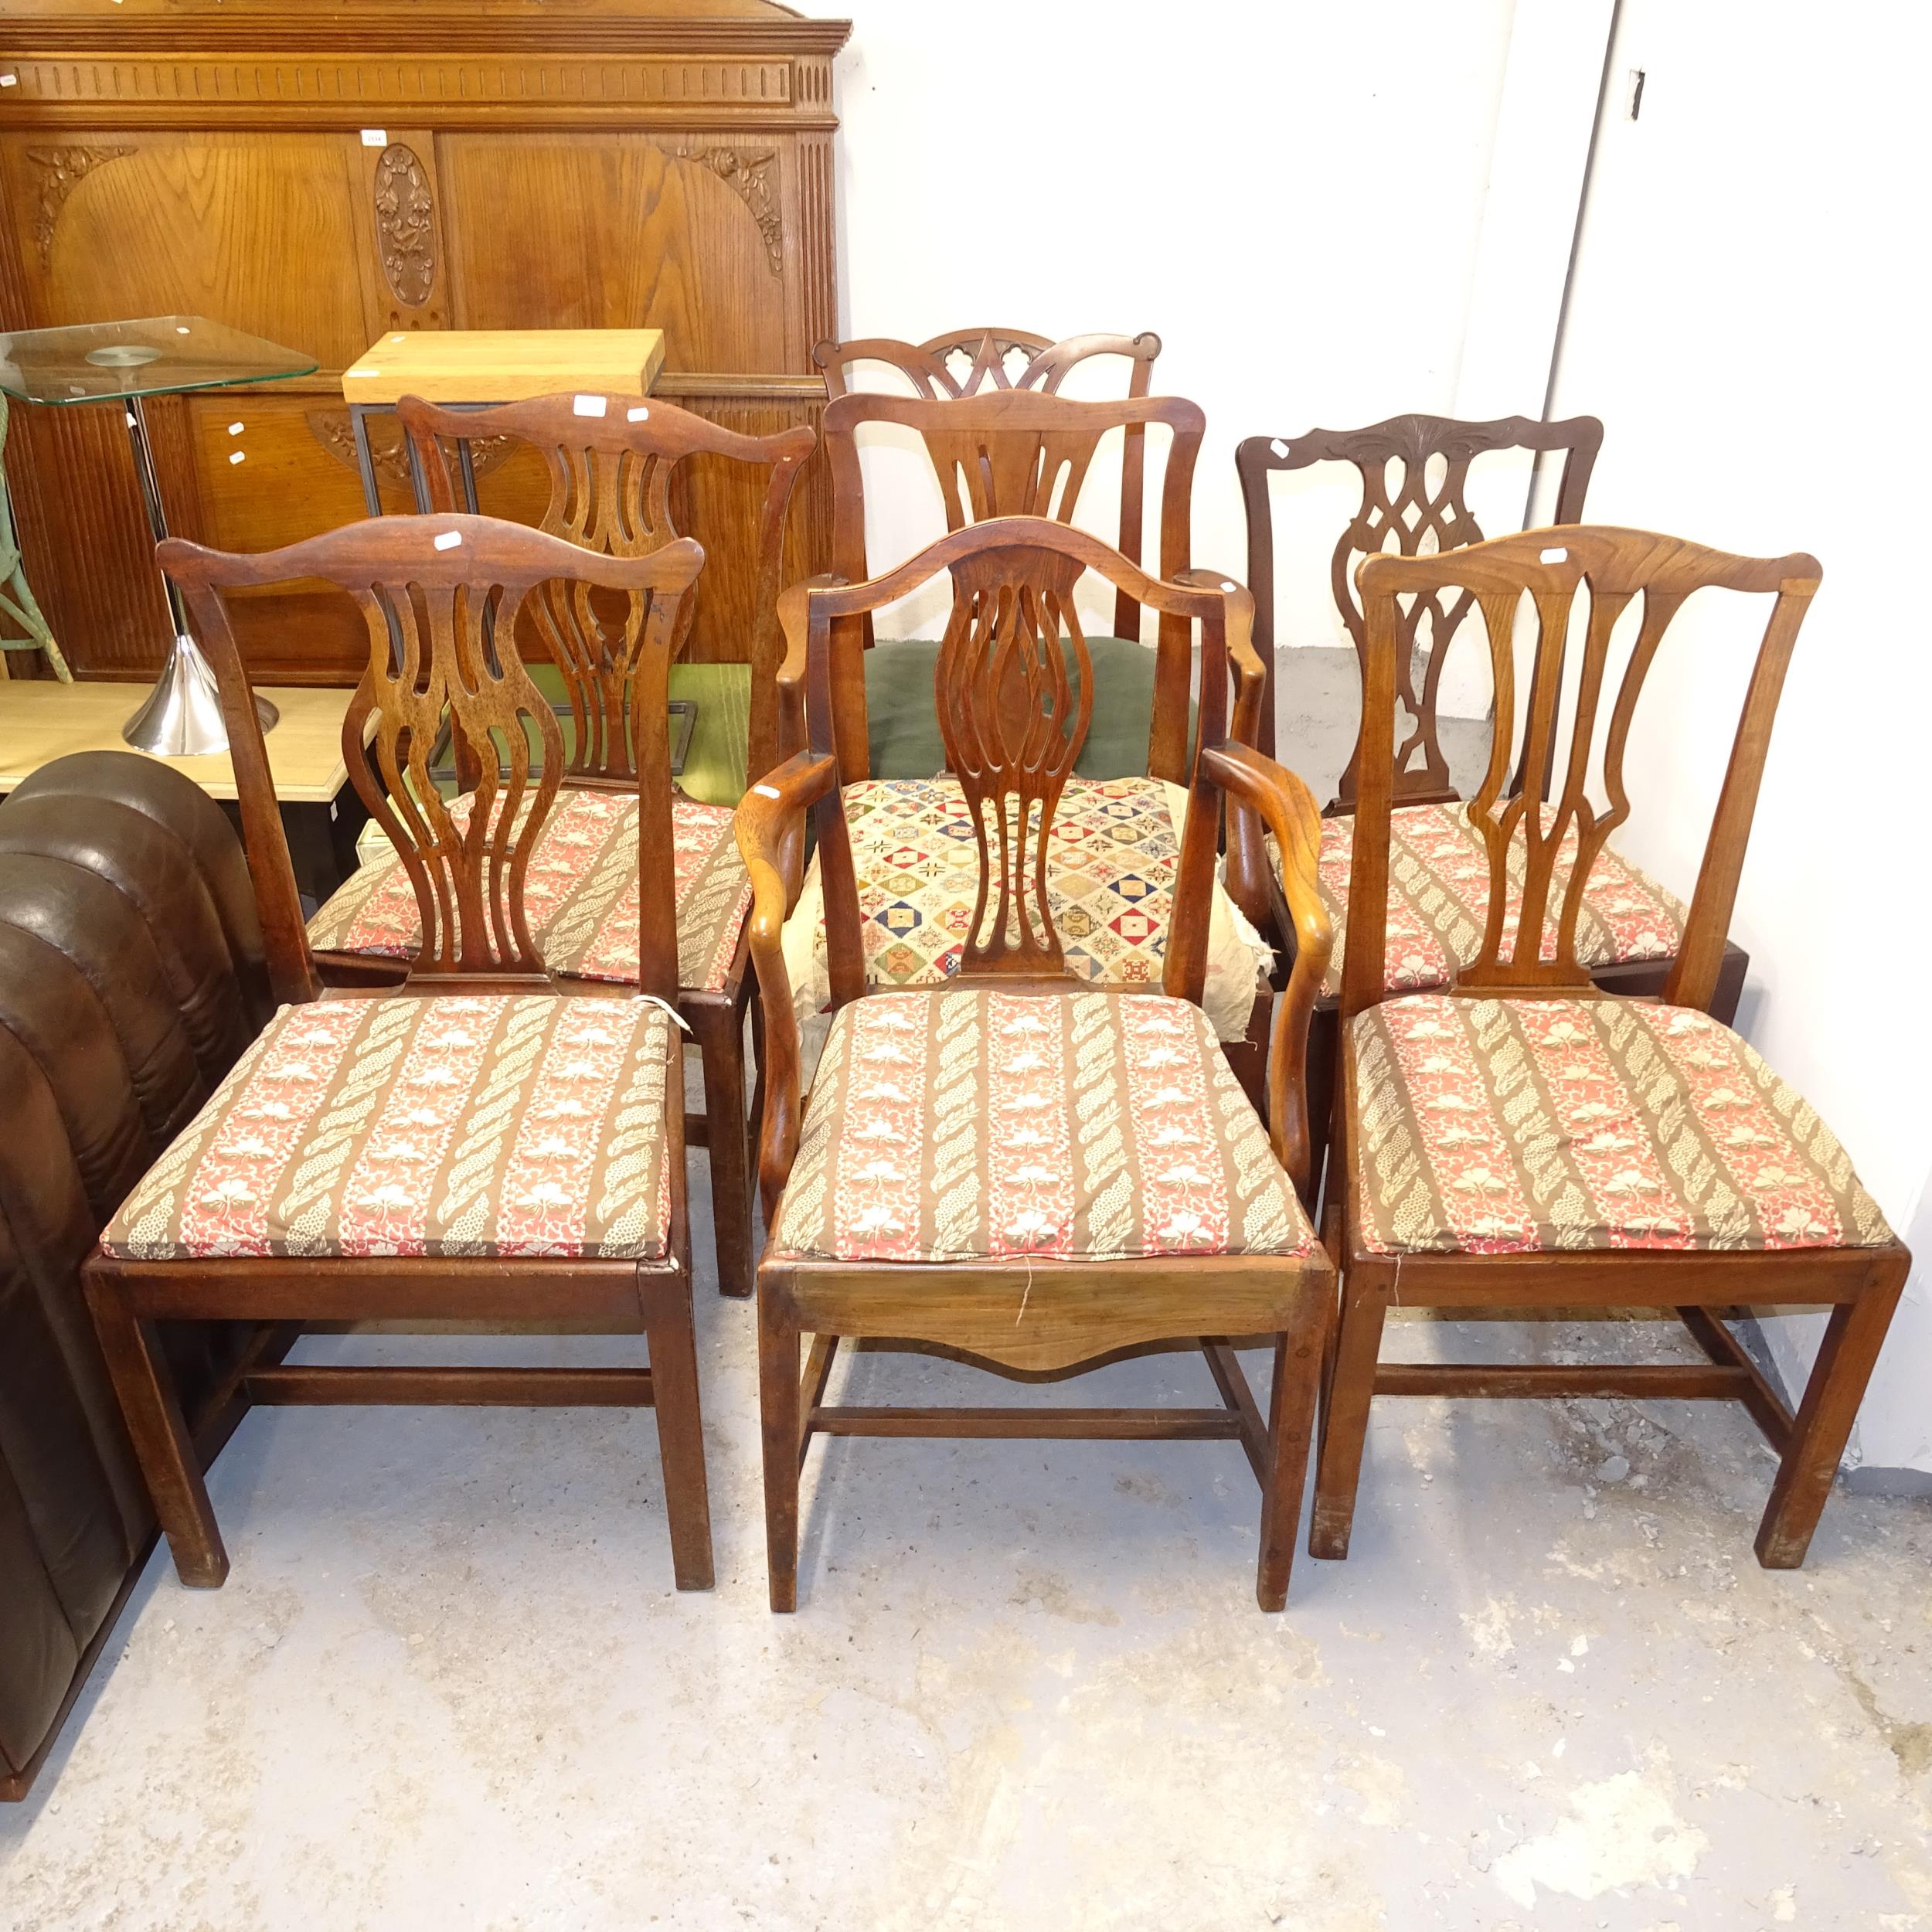 7 various 19th century mahogany Chippendale and Hepplewhite design chairs, including 2 elbow chairs